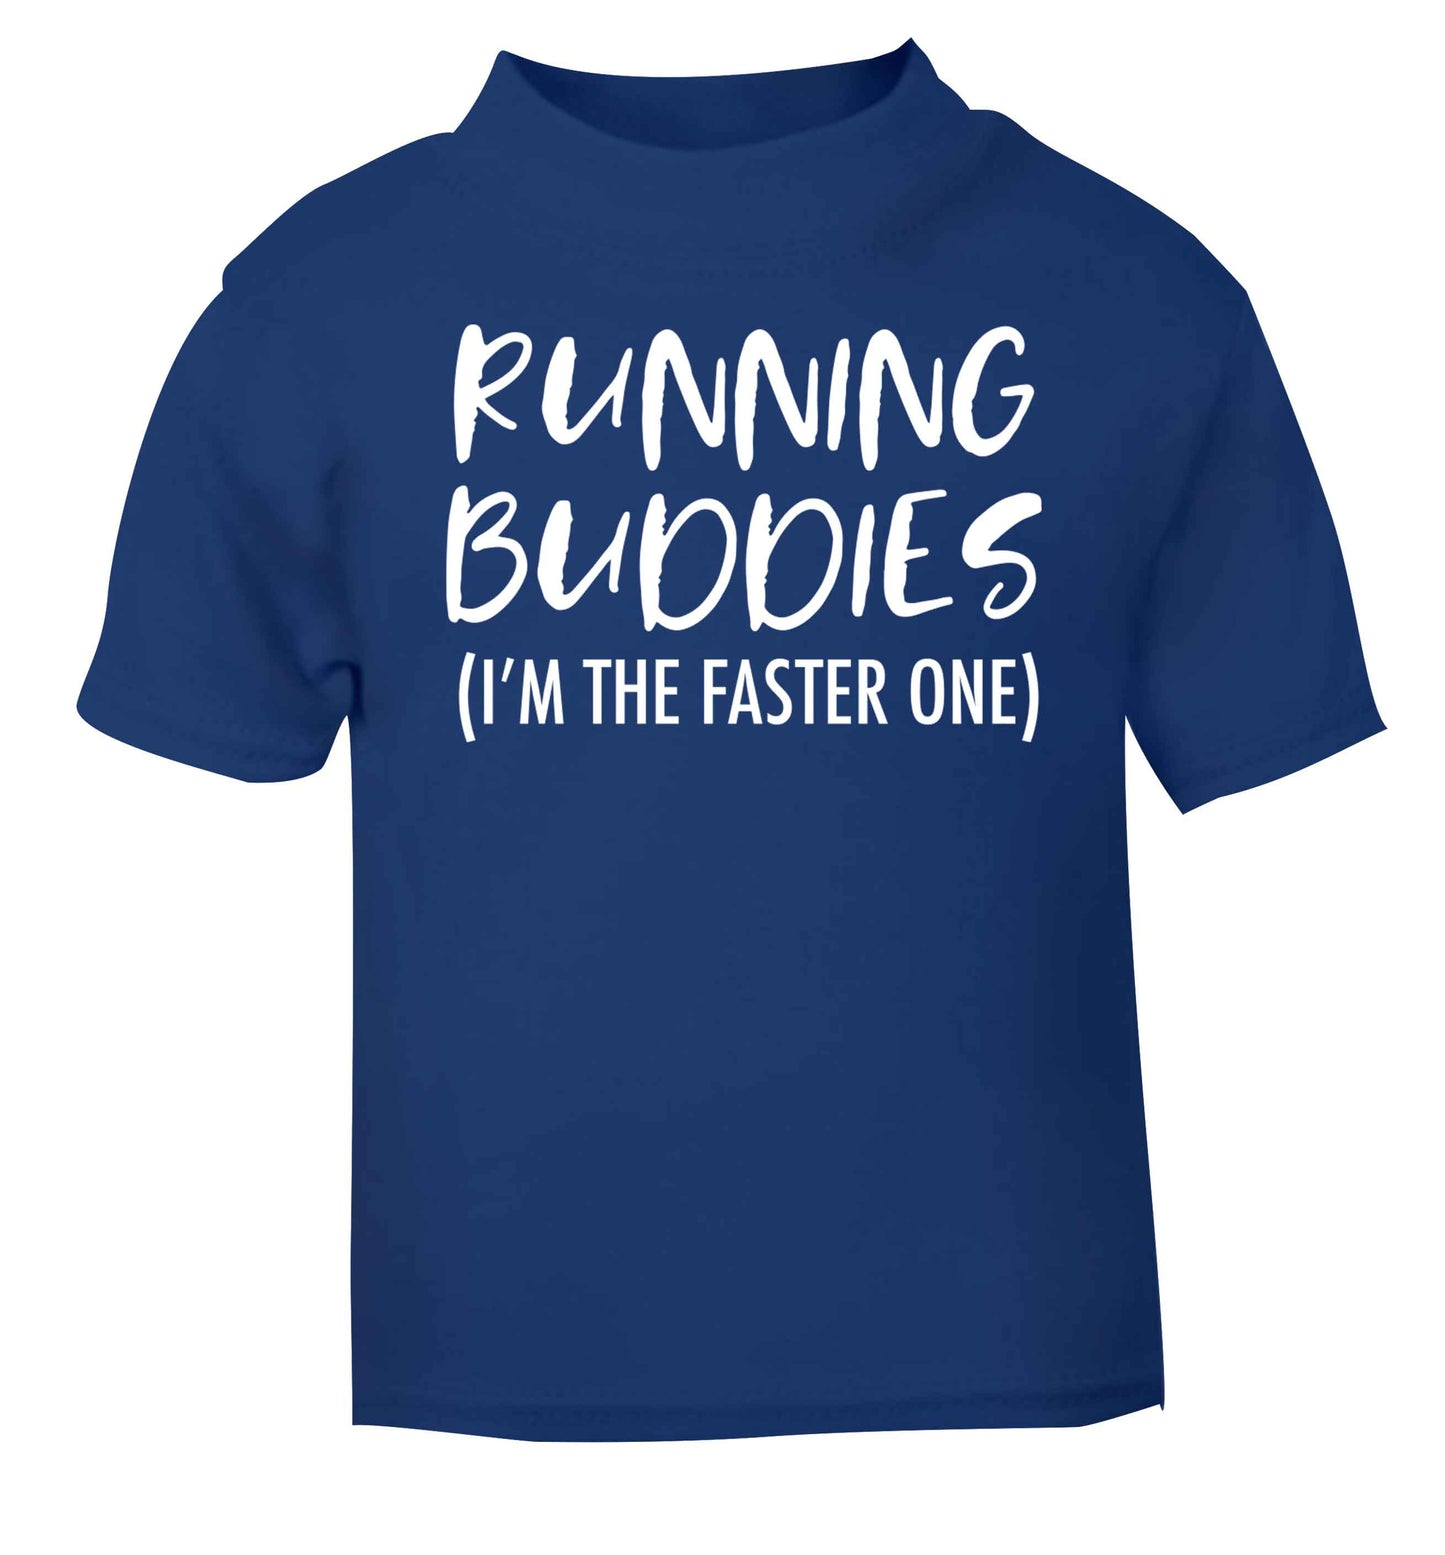 Running buddies (I'm the faster one) blue baby toddler Tshirt 2 Years